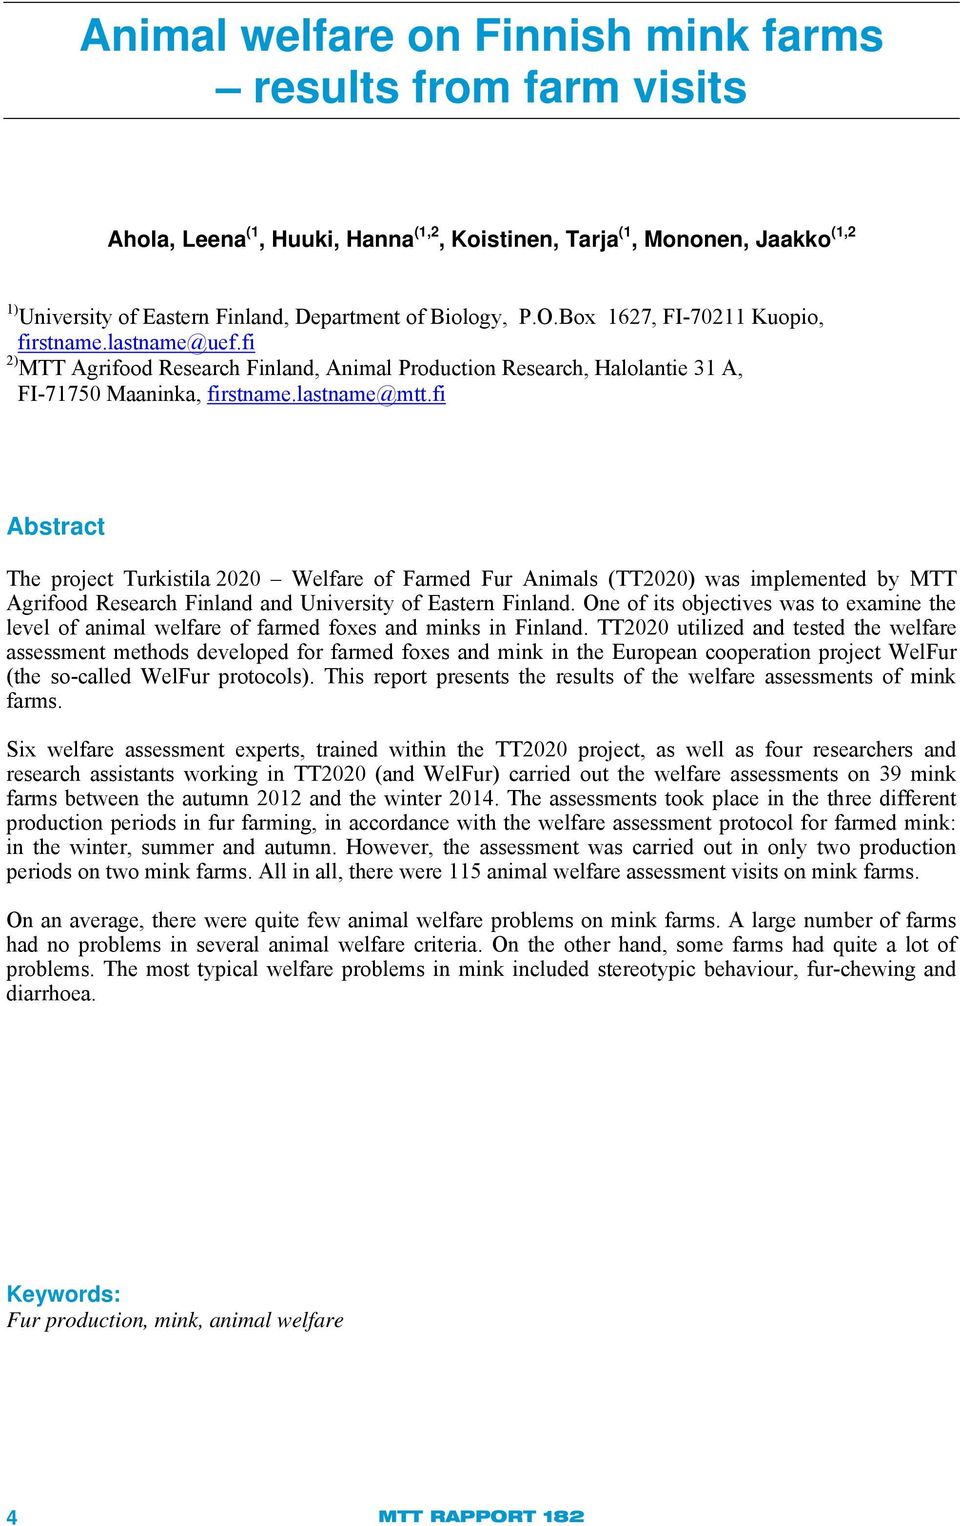 fi Abstract The project Turkistila 2020 Welfare of Farmed Fur Animals (TT2020) was implemented by MTT Agrifood Research Finland and University of Eastern Finland.